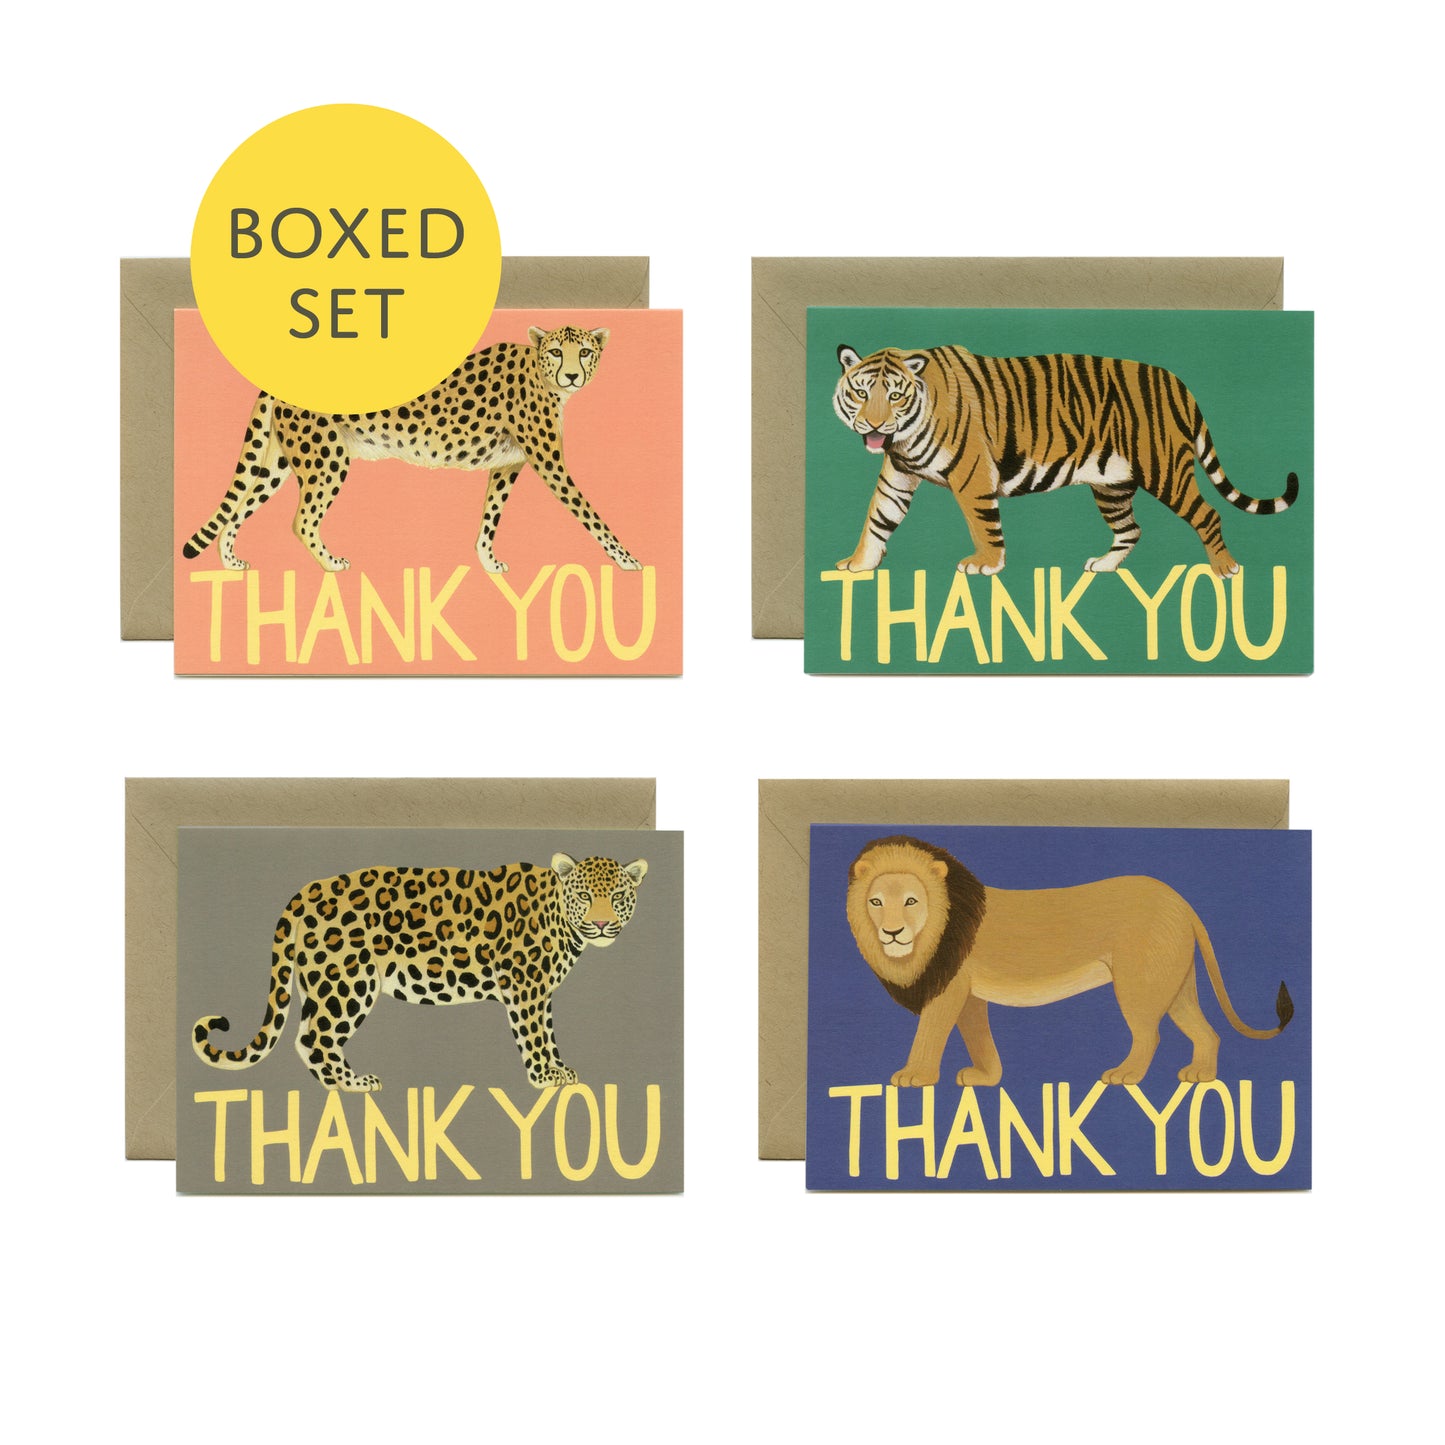 BIG CATS - THANK YOU GREETING CARDS, VARIETY BOXED SET OF 8